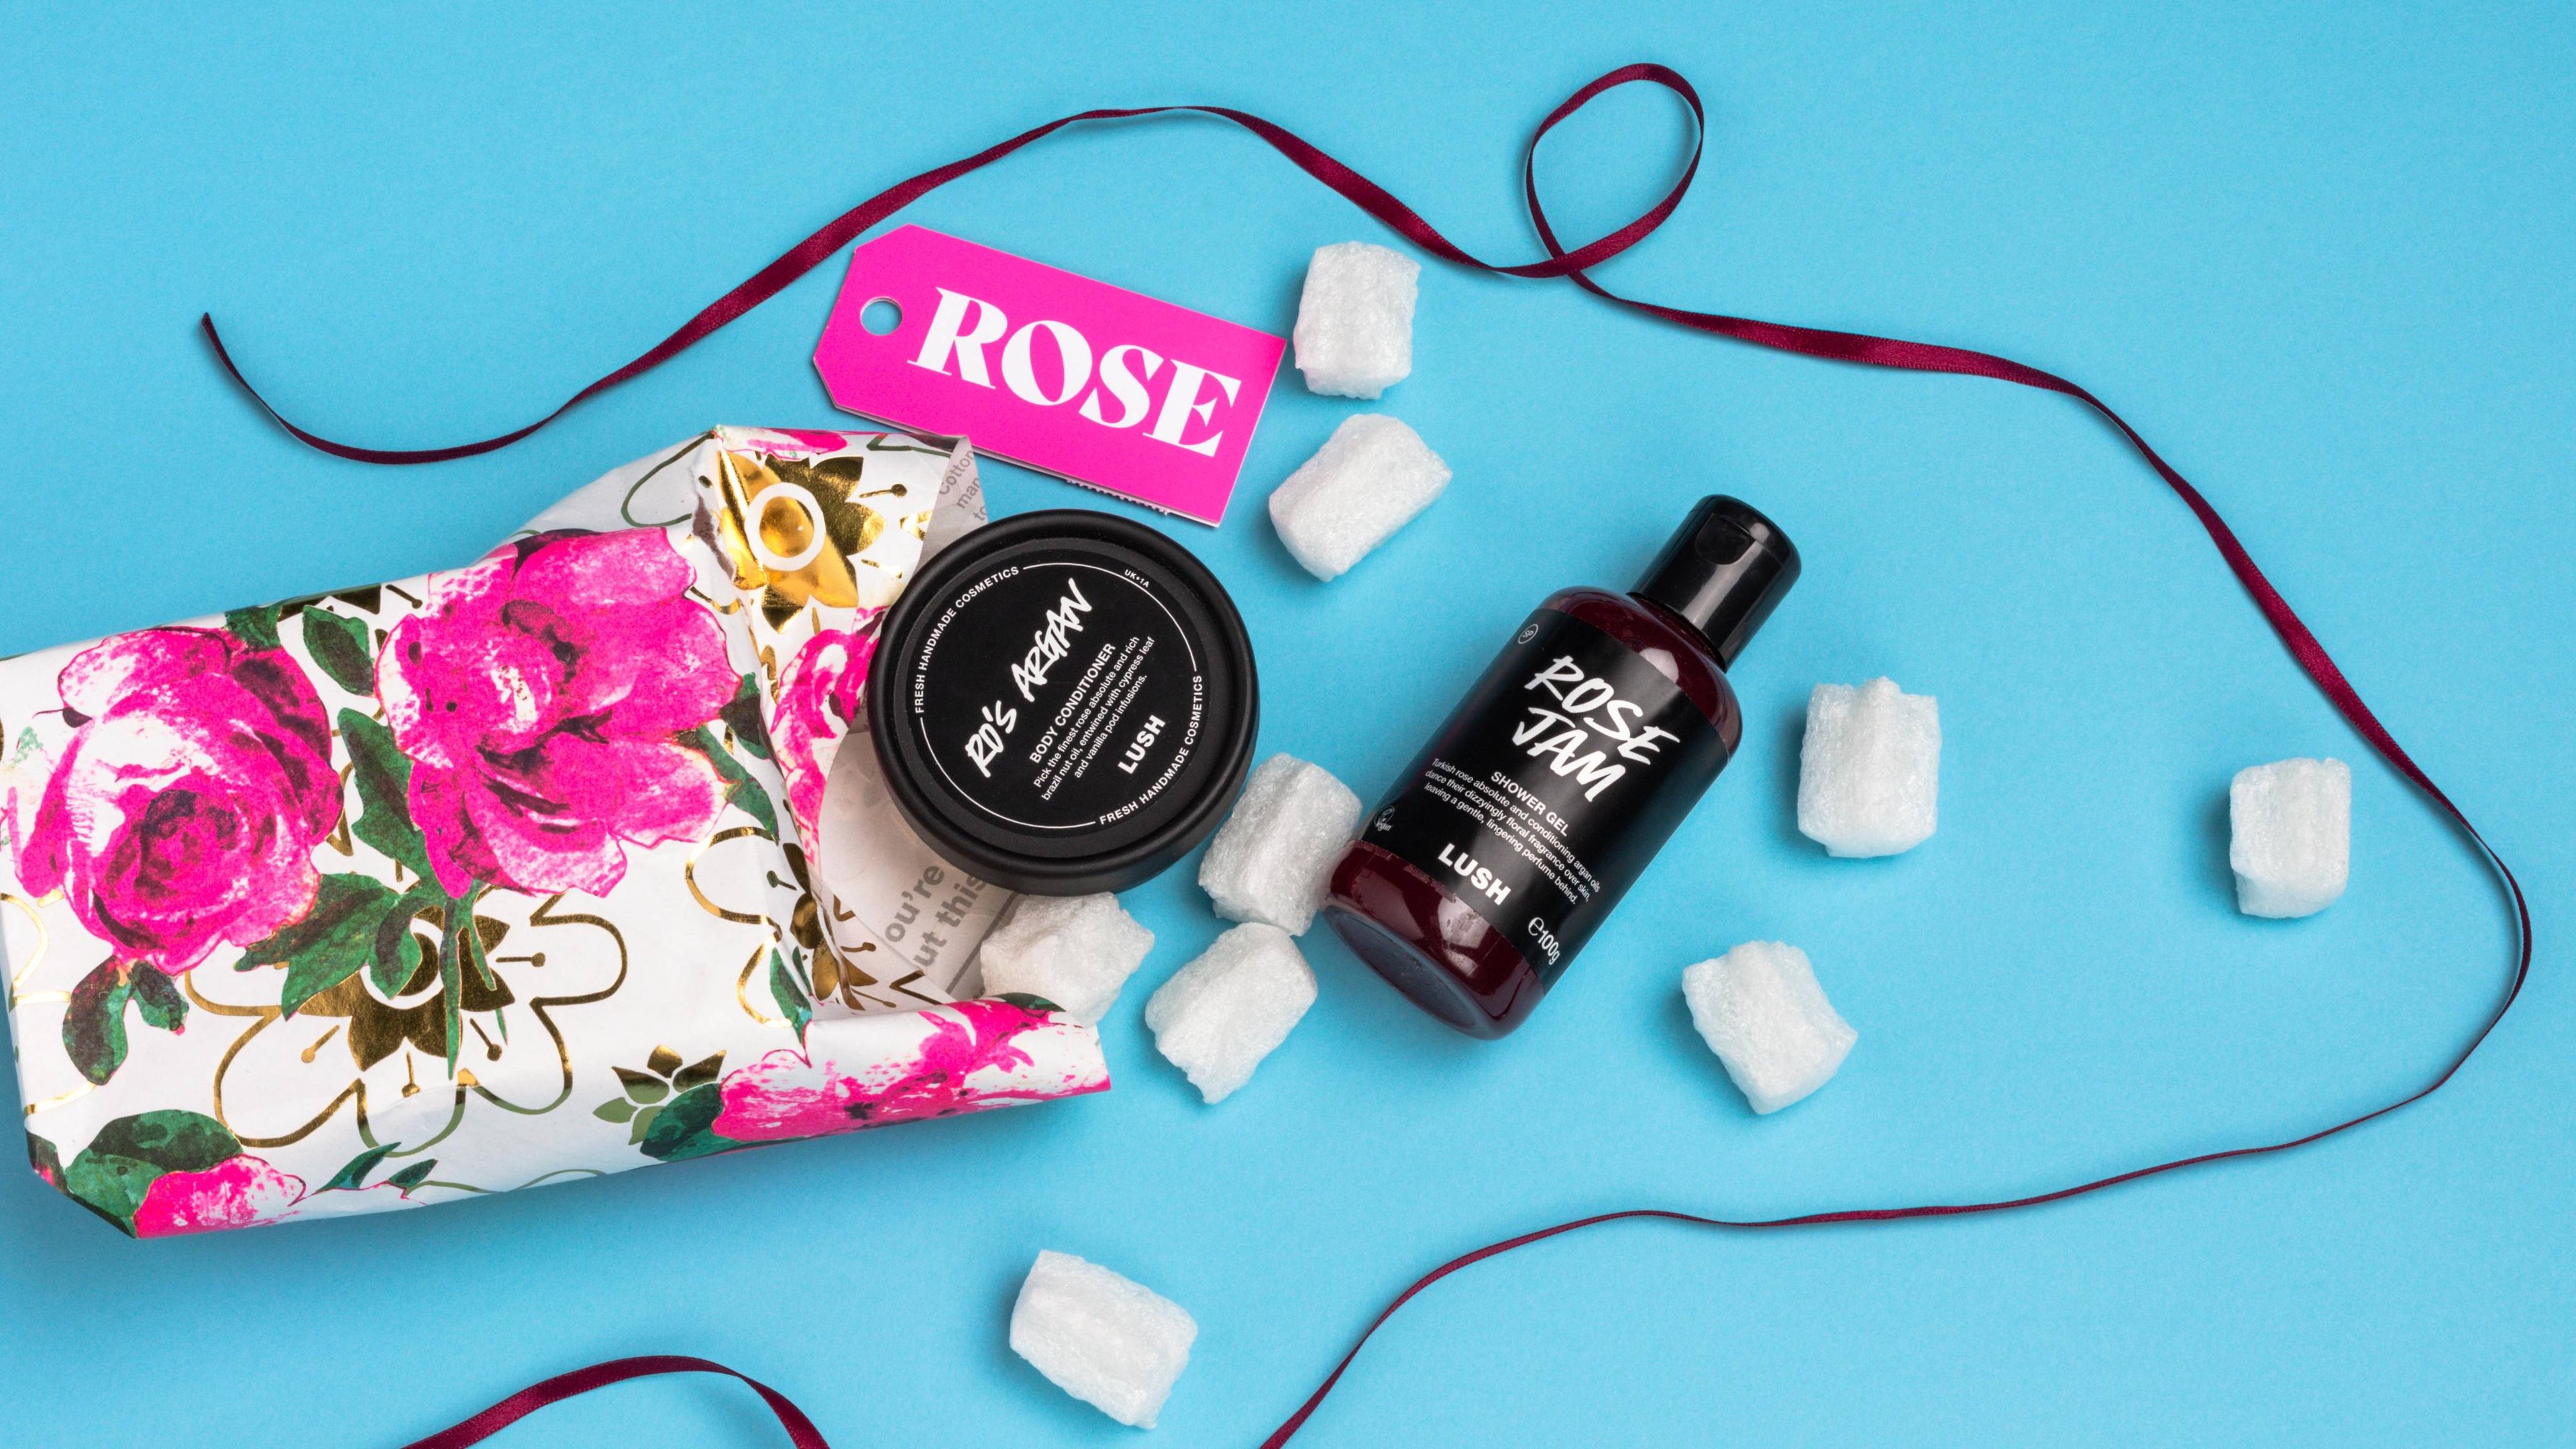 Rose, opened onto a light blue background, with its included products and eco packaging pops arranged randomly.